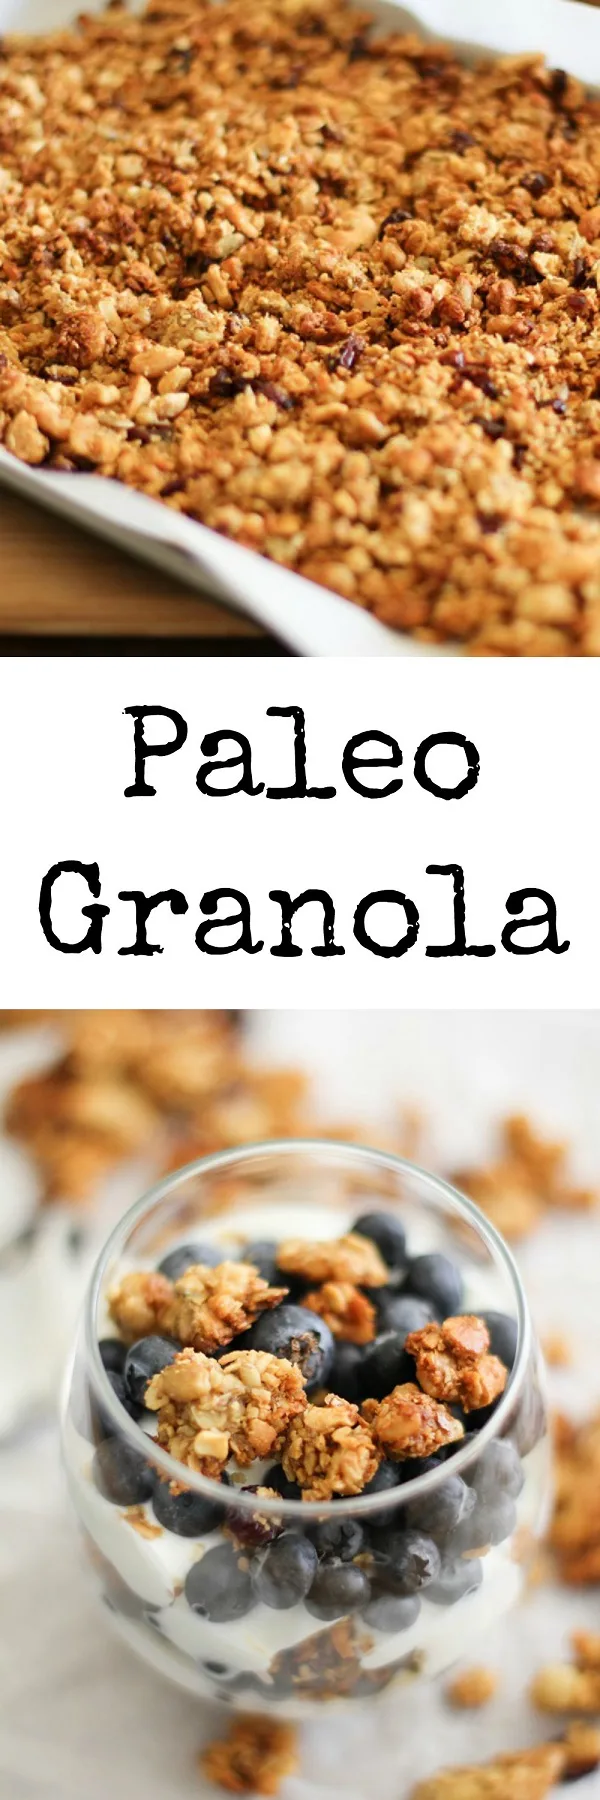 Paleo Granola - grain-free, made with nuts and seeds. Naturally sweetened and protein-packed #healthy #recipe #breakfast #paleo